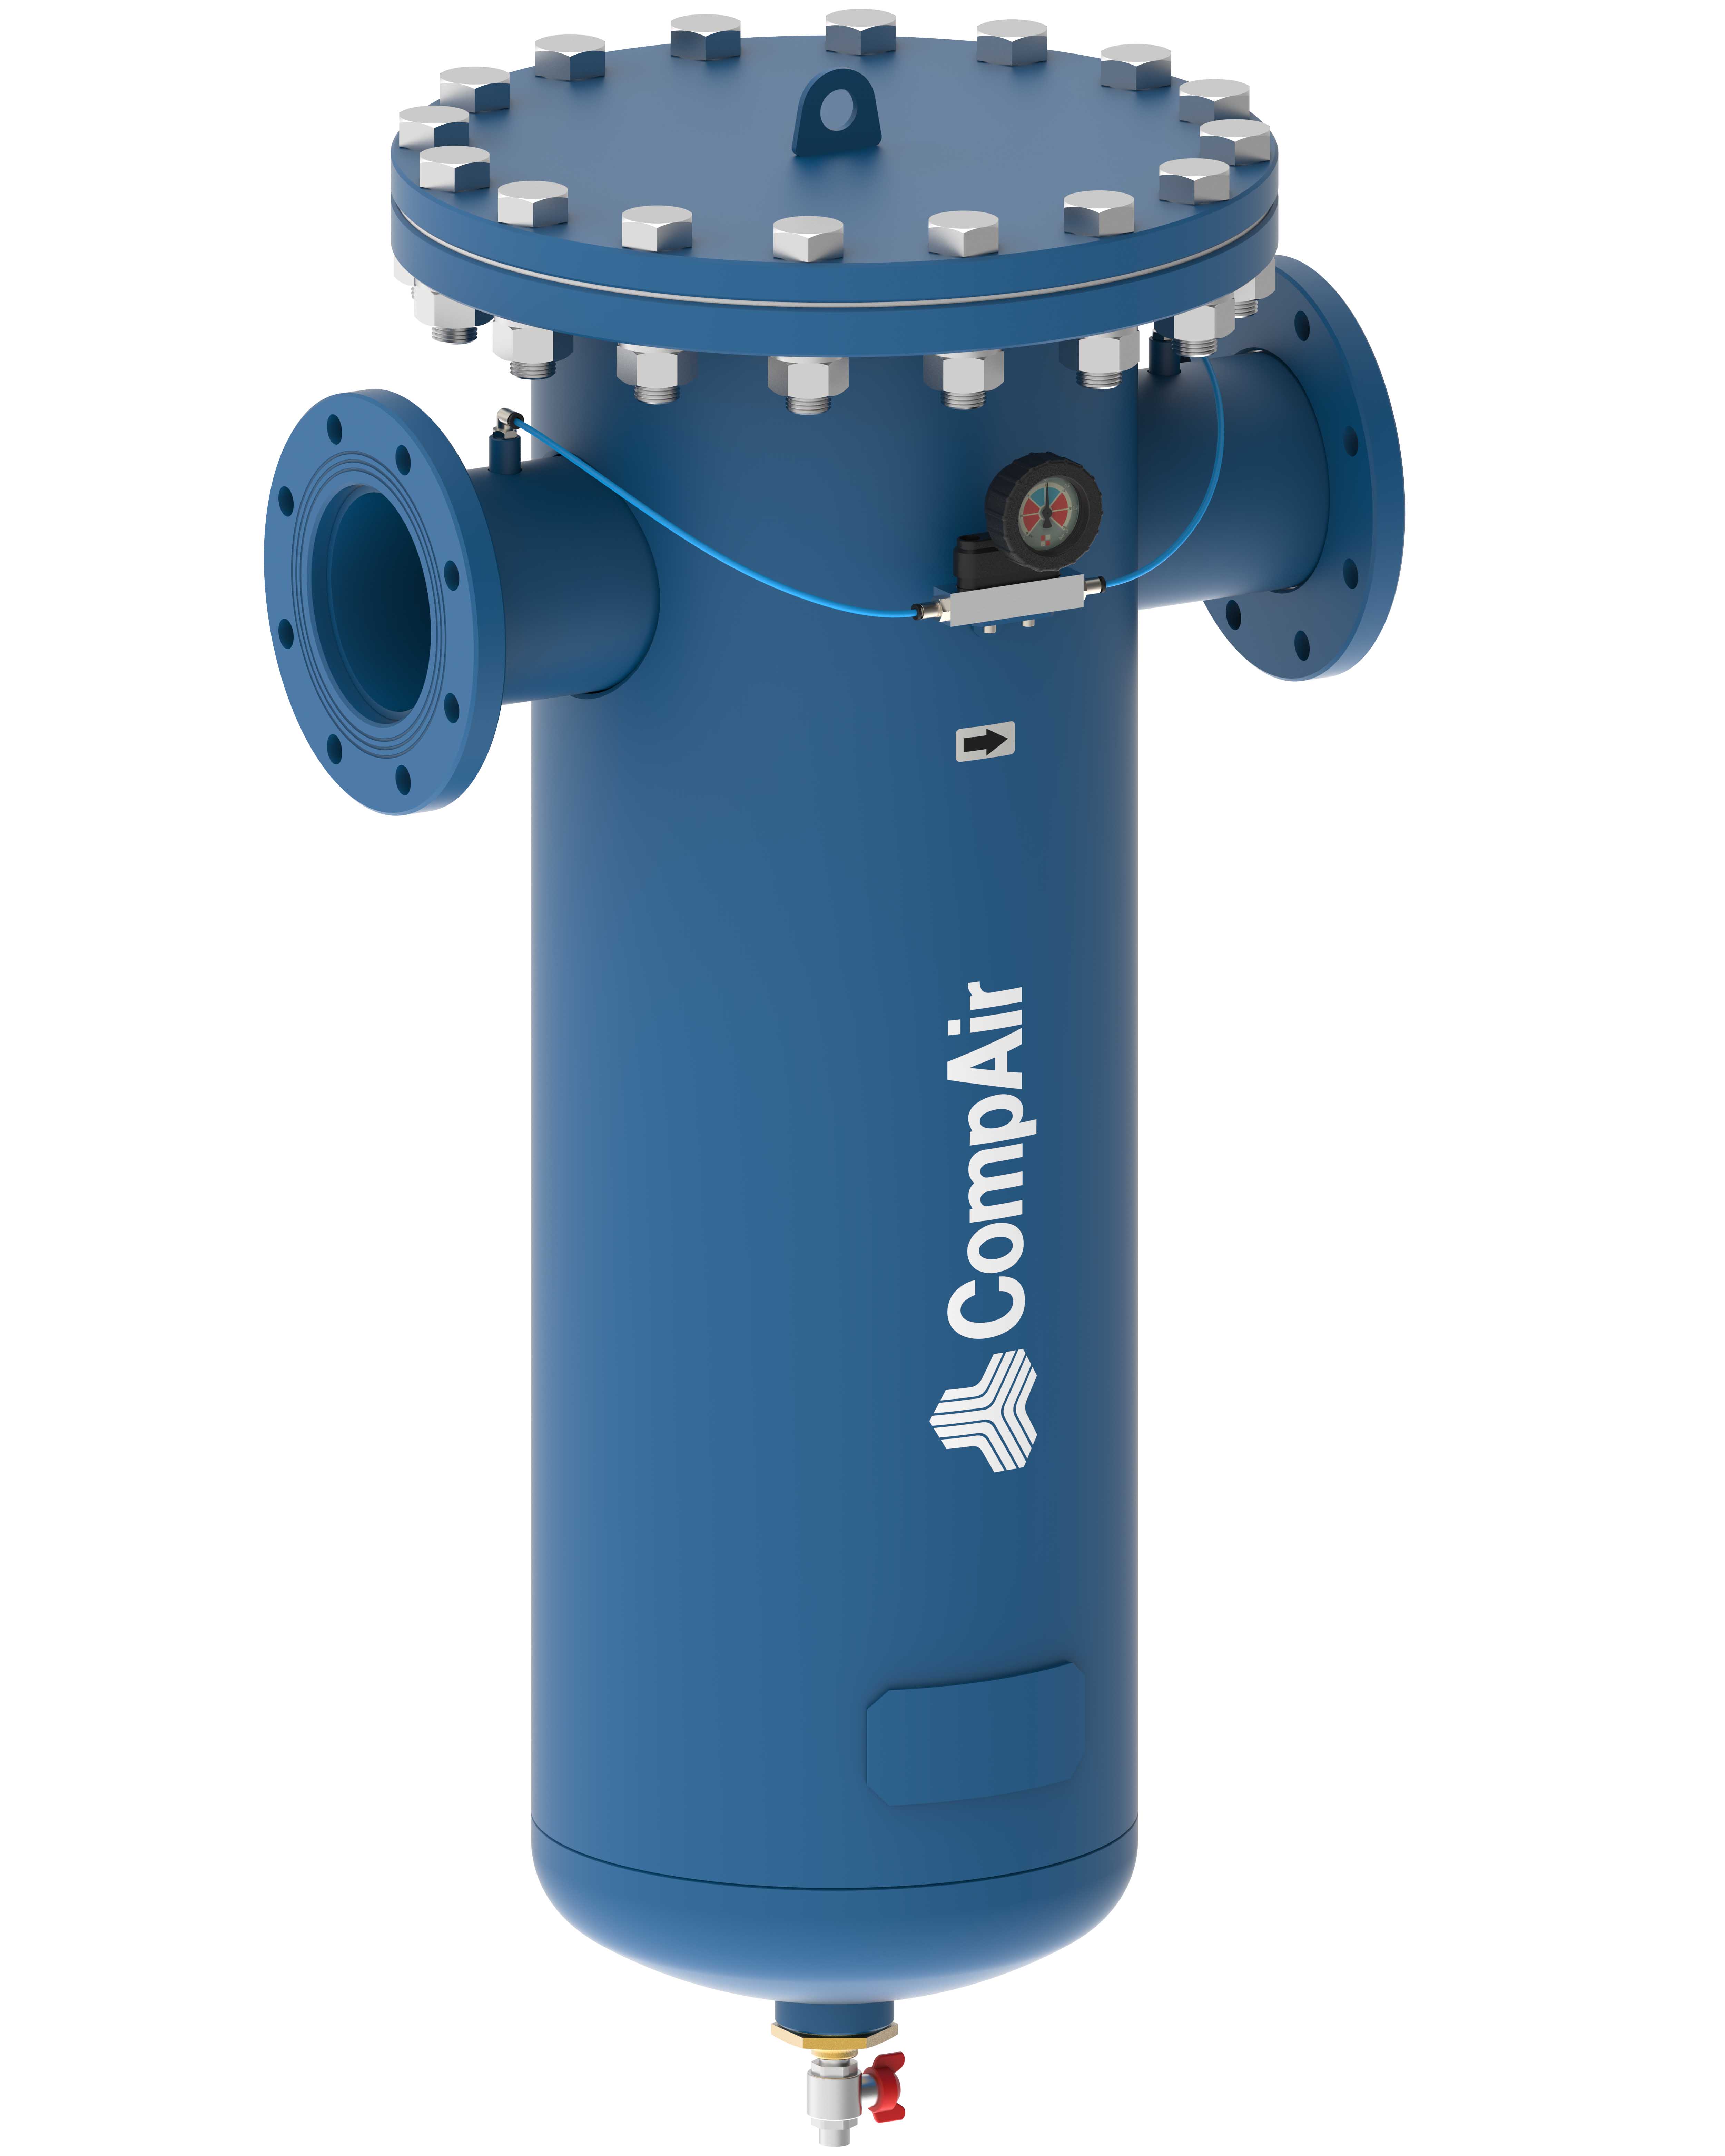 The CF cast aluminium range of compressed air filters delivers flow rates of up to 45 m3/min.